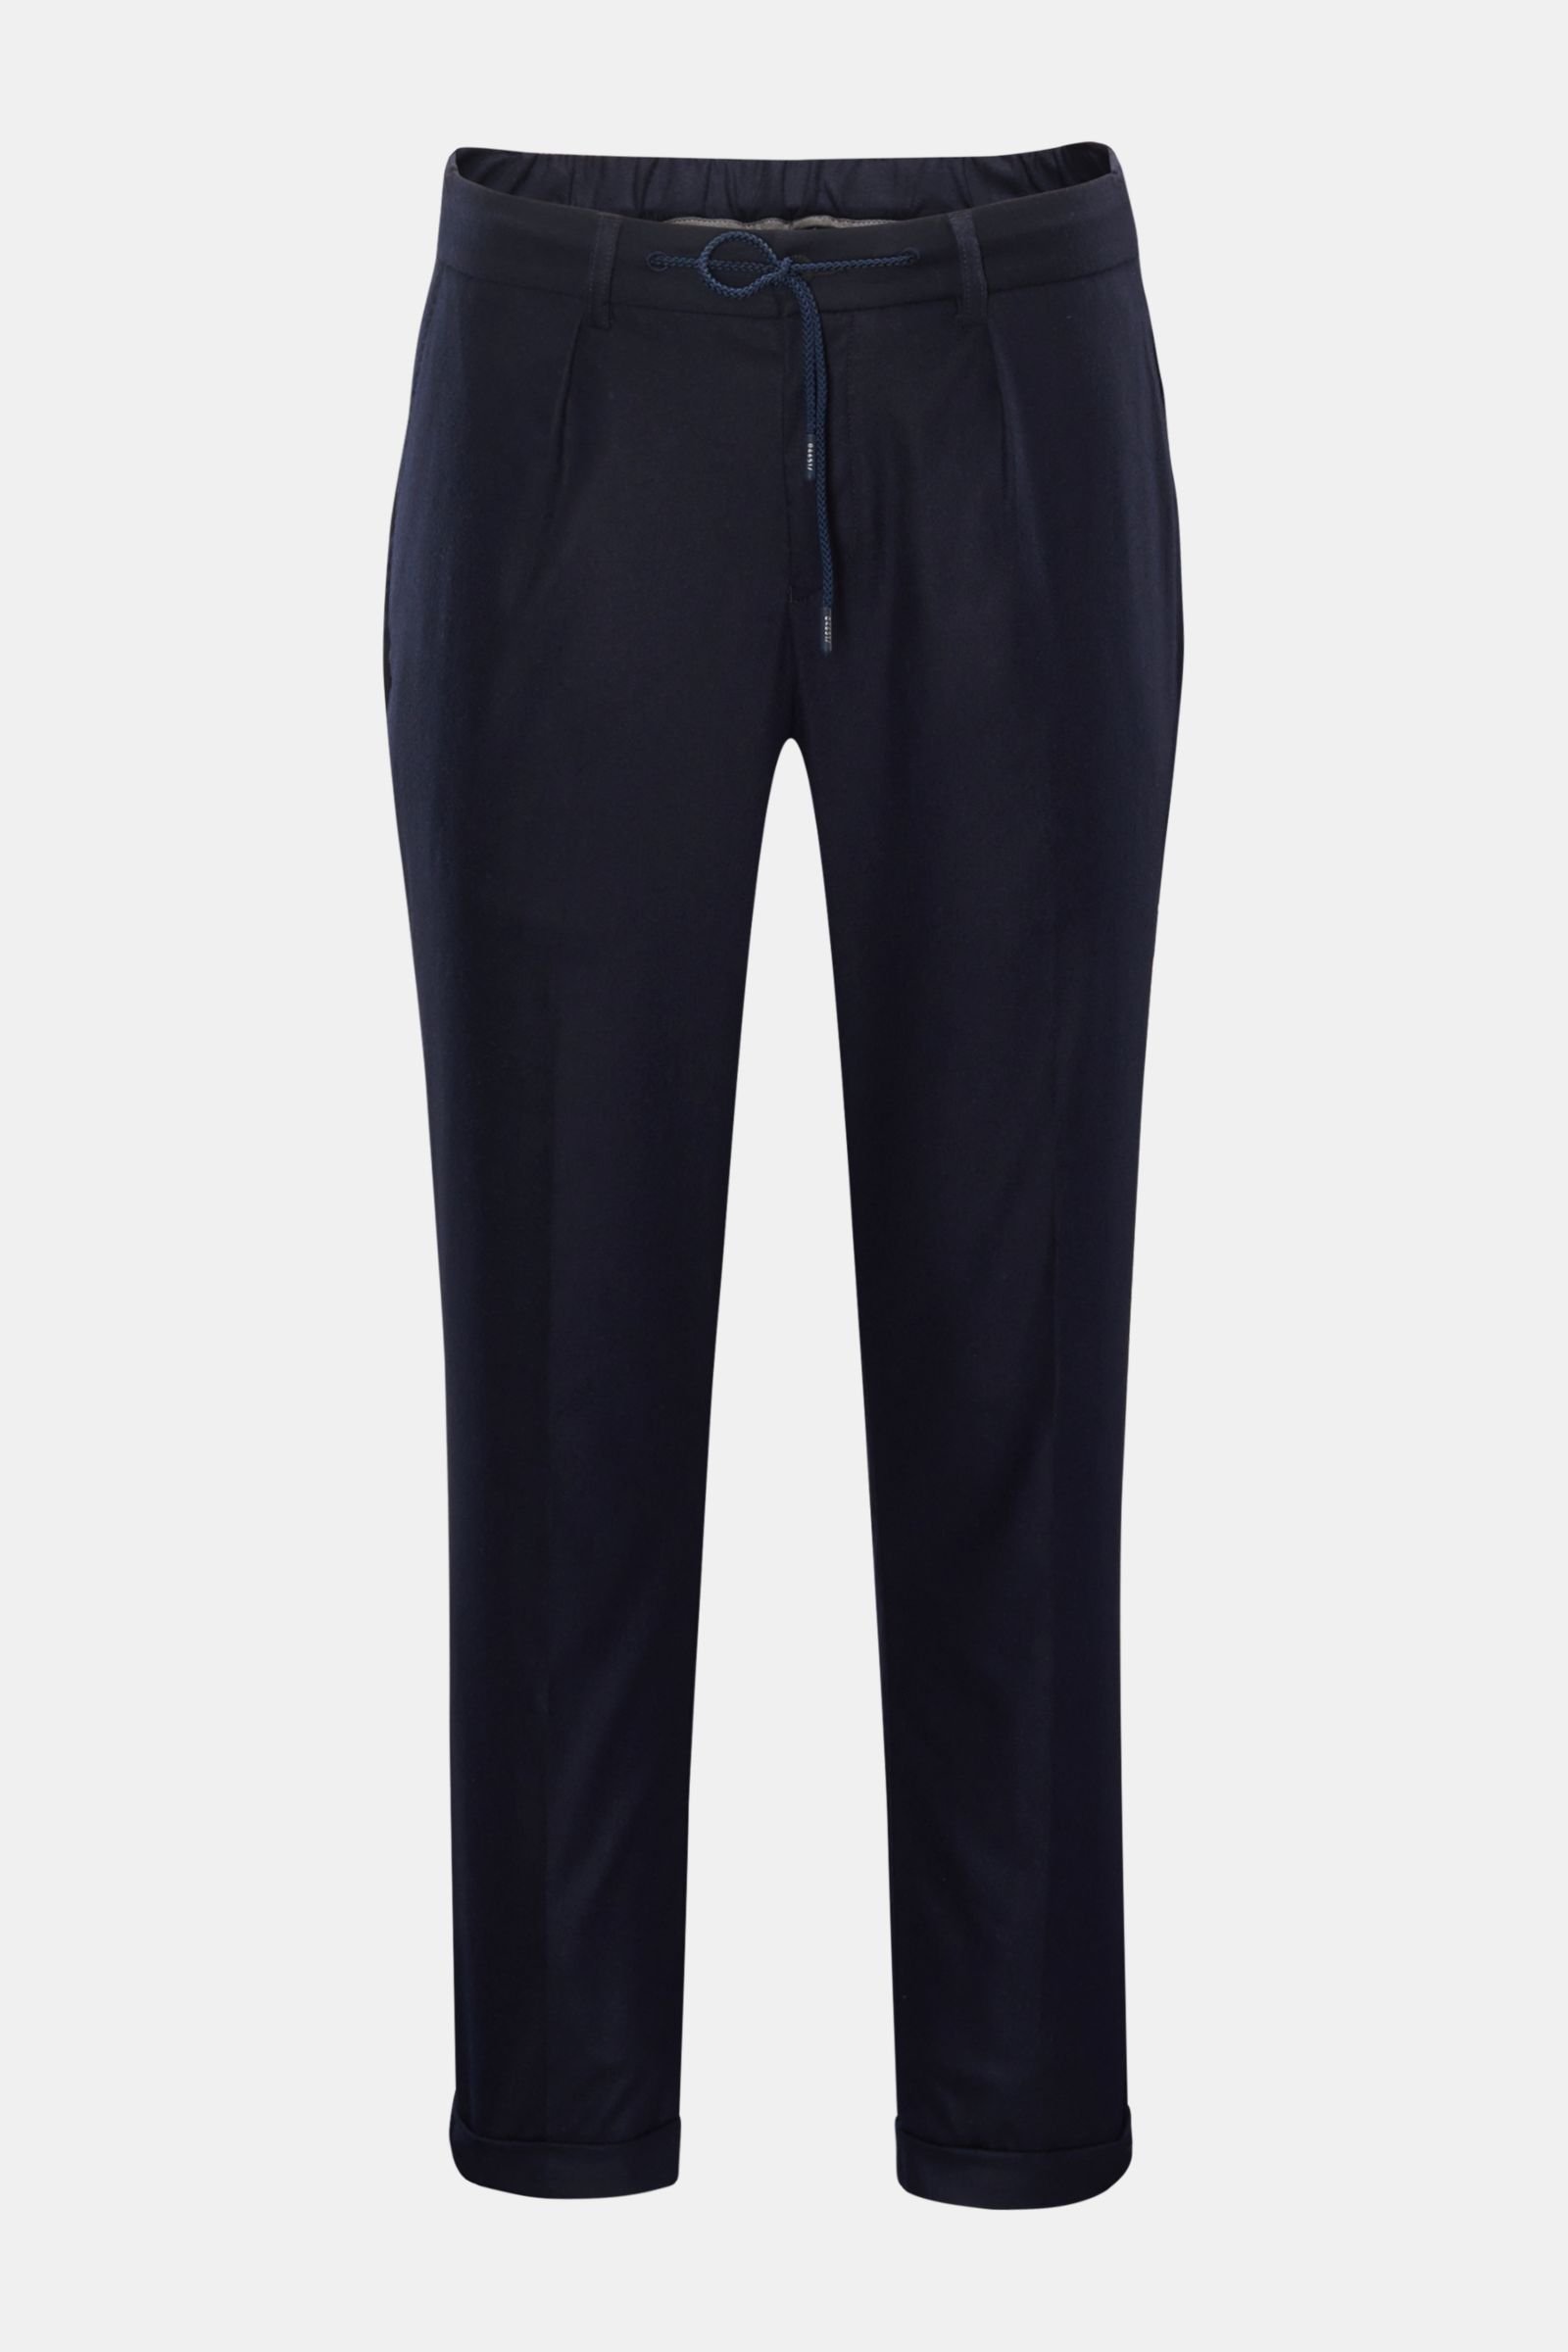 Flannel jogger pants navy